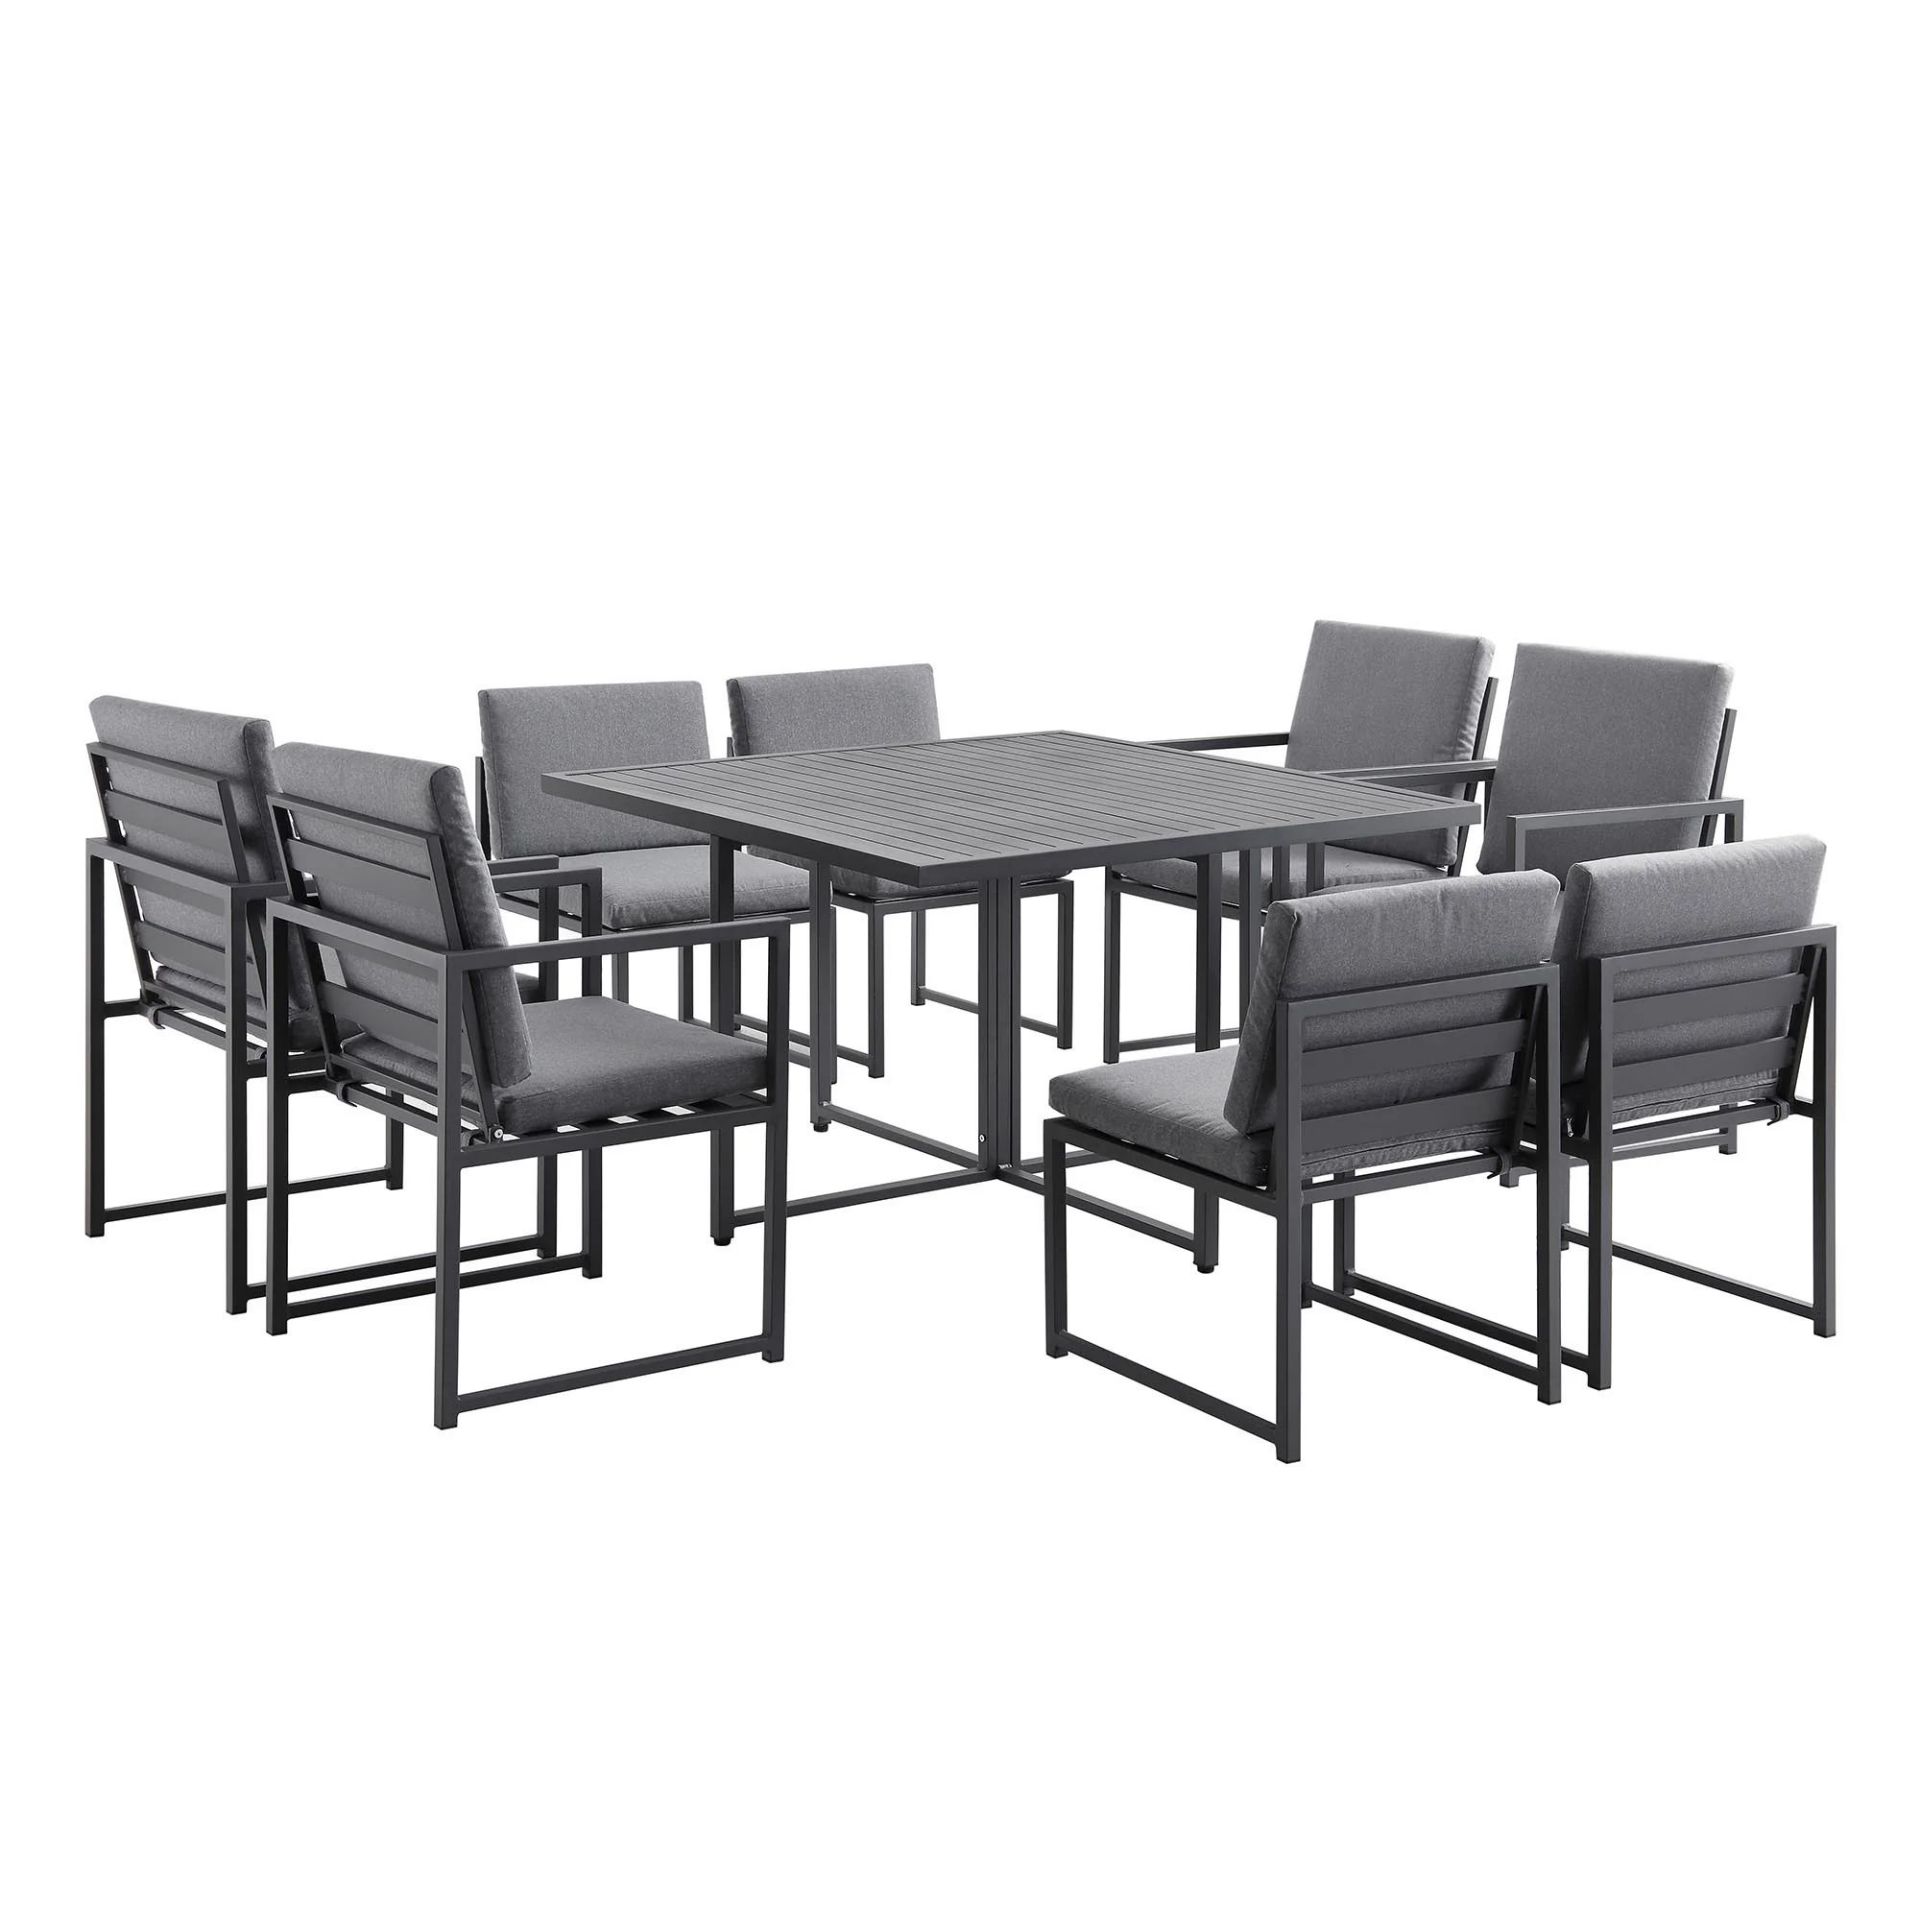 Albany Aluminium 9-Piece Outdoor Cube Dining Set, Grey. - R14BW. RPR £1,399.00. Comprising of a bold - Image 2 of 2